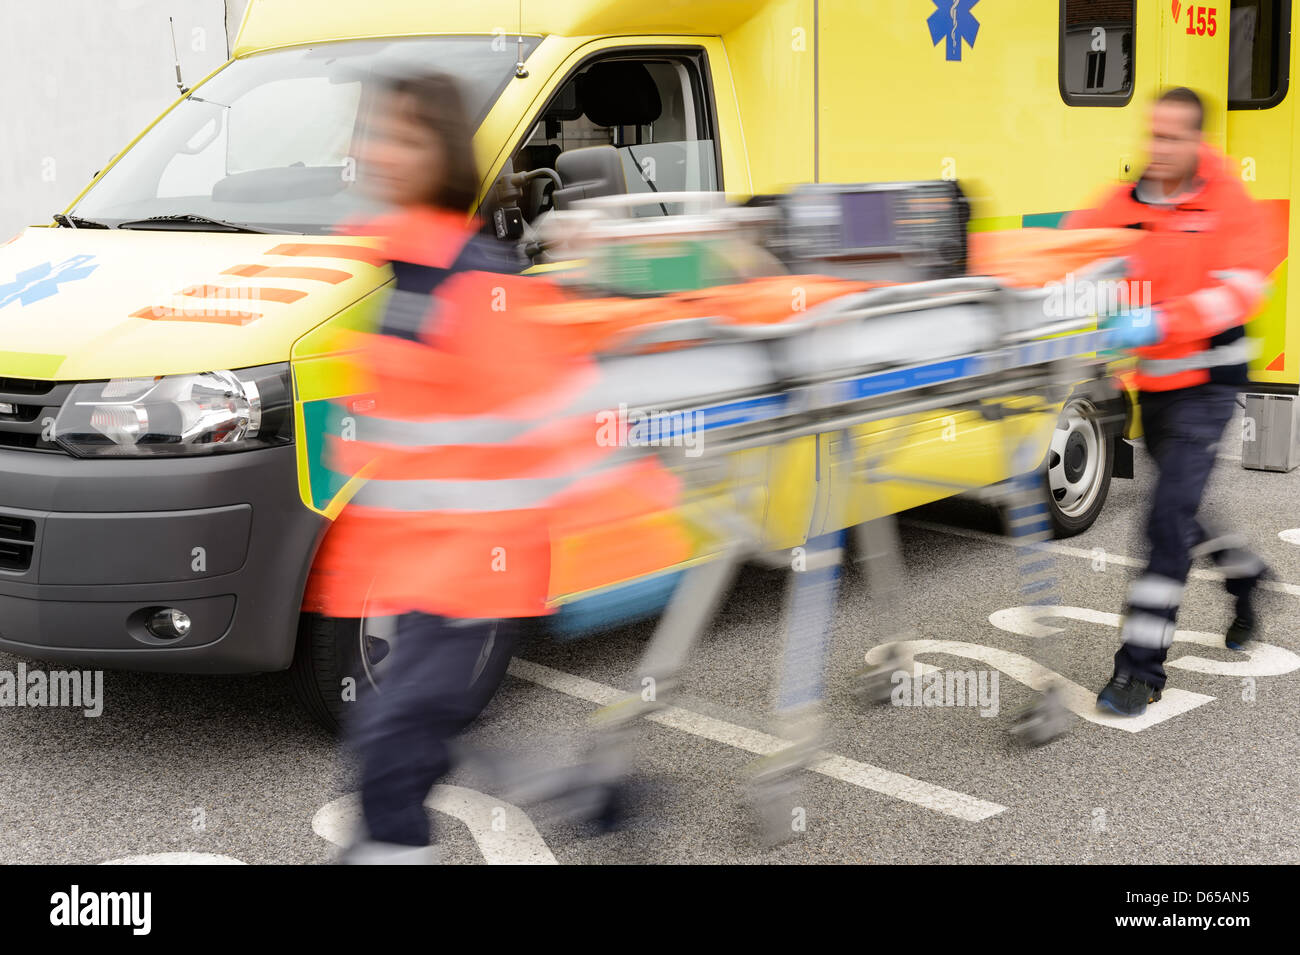 Running blurry paramedics team with stretcher and ambulance car Stock Photo